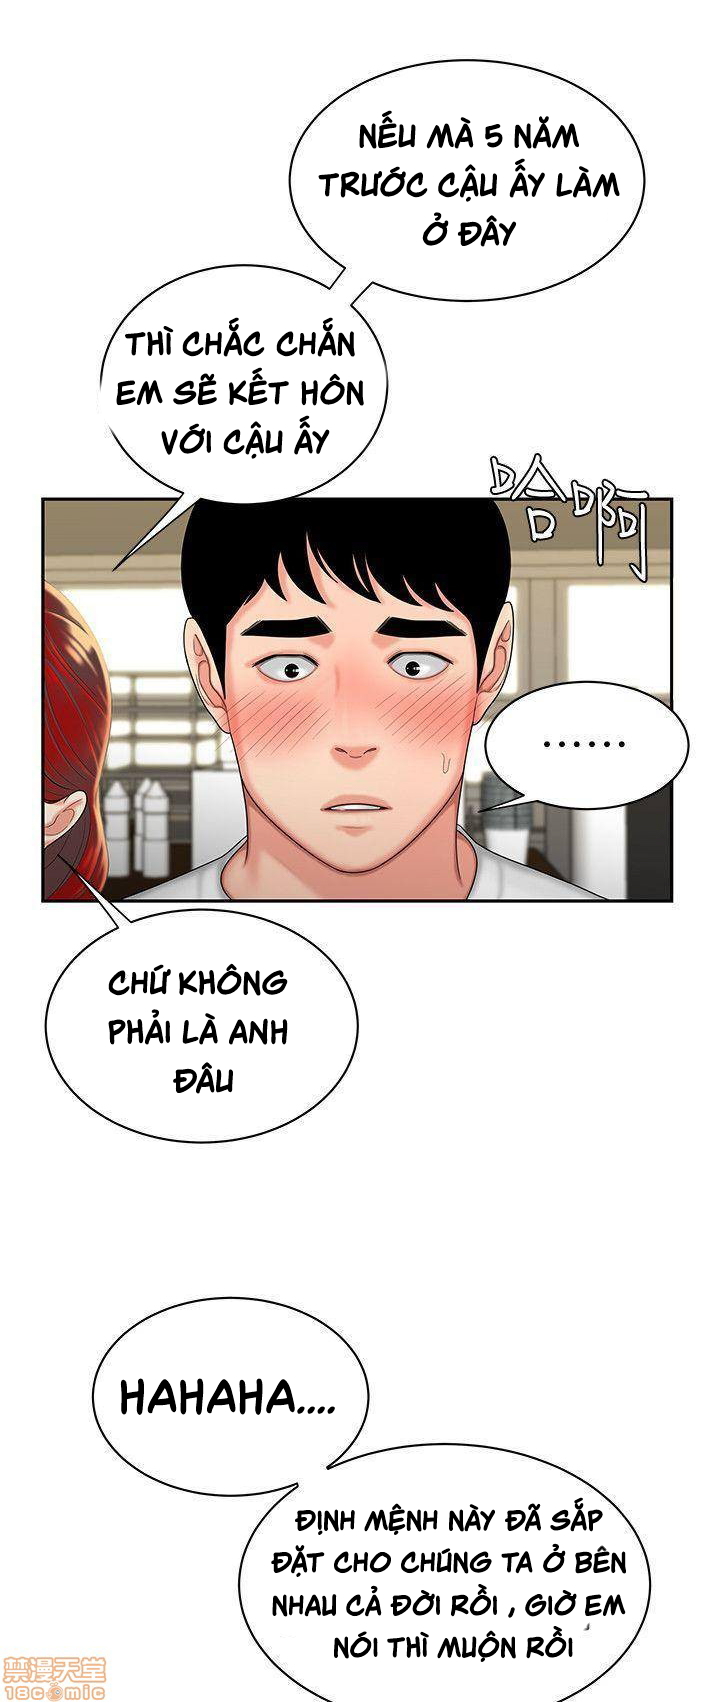 Chapter 001 : Chapter 01 ảnh 15